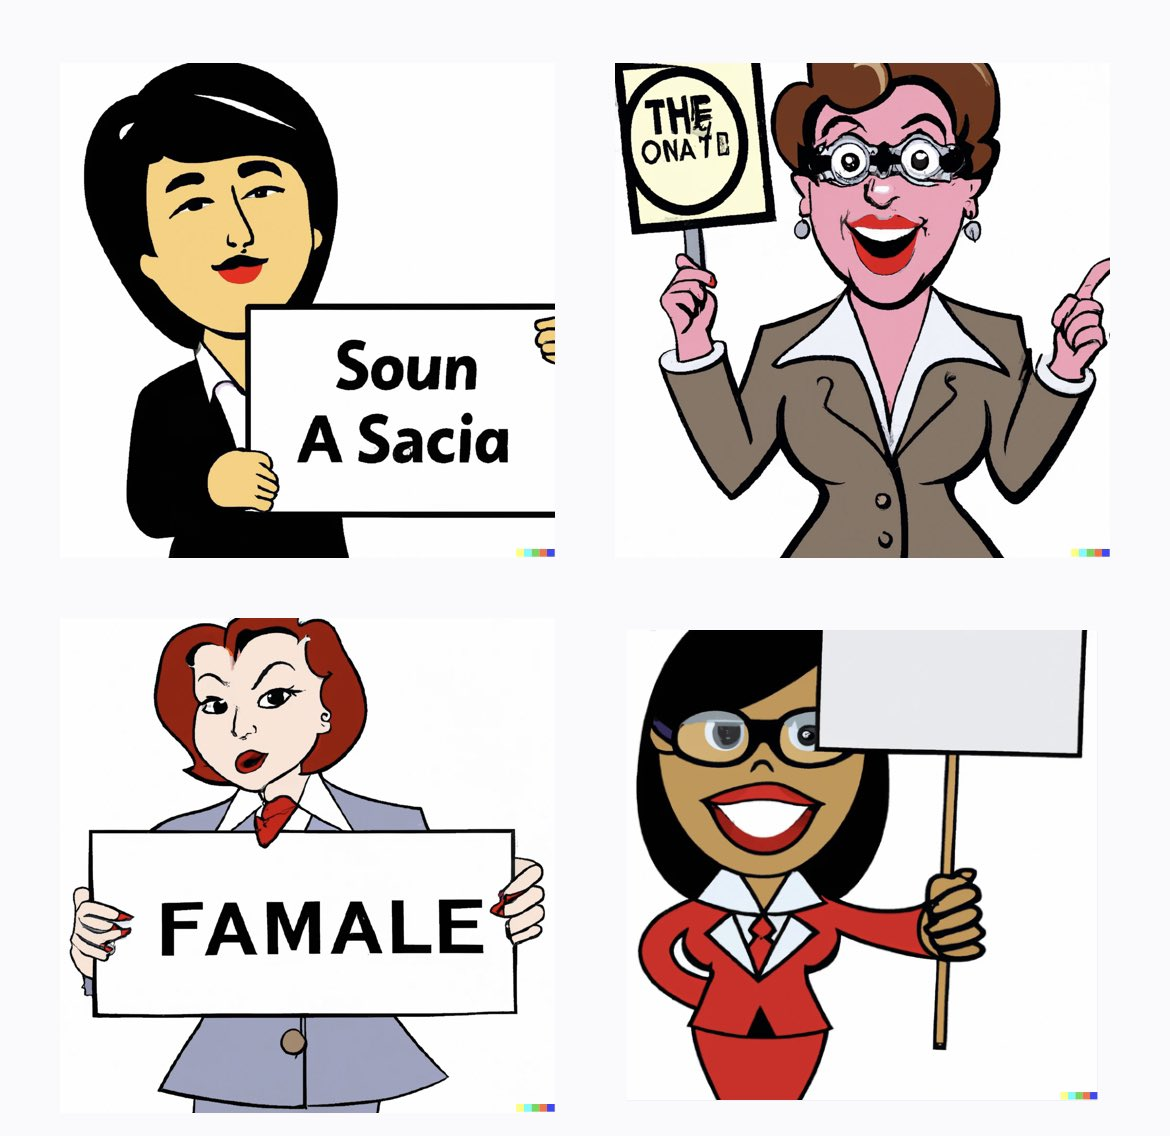 A series of 'clip art' style generated business people, with misspelled attempts at "female" or other 'diversity markers' on signs